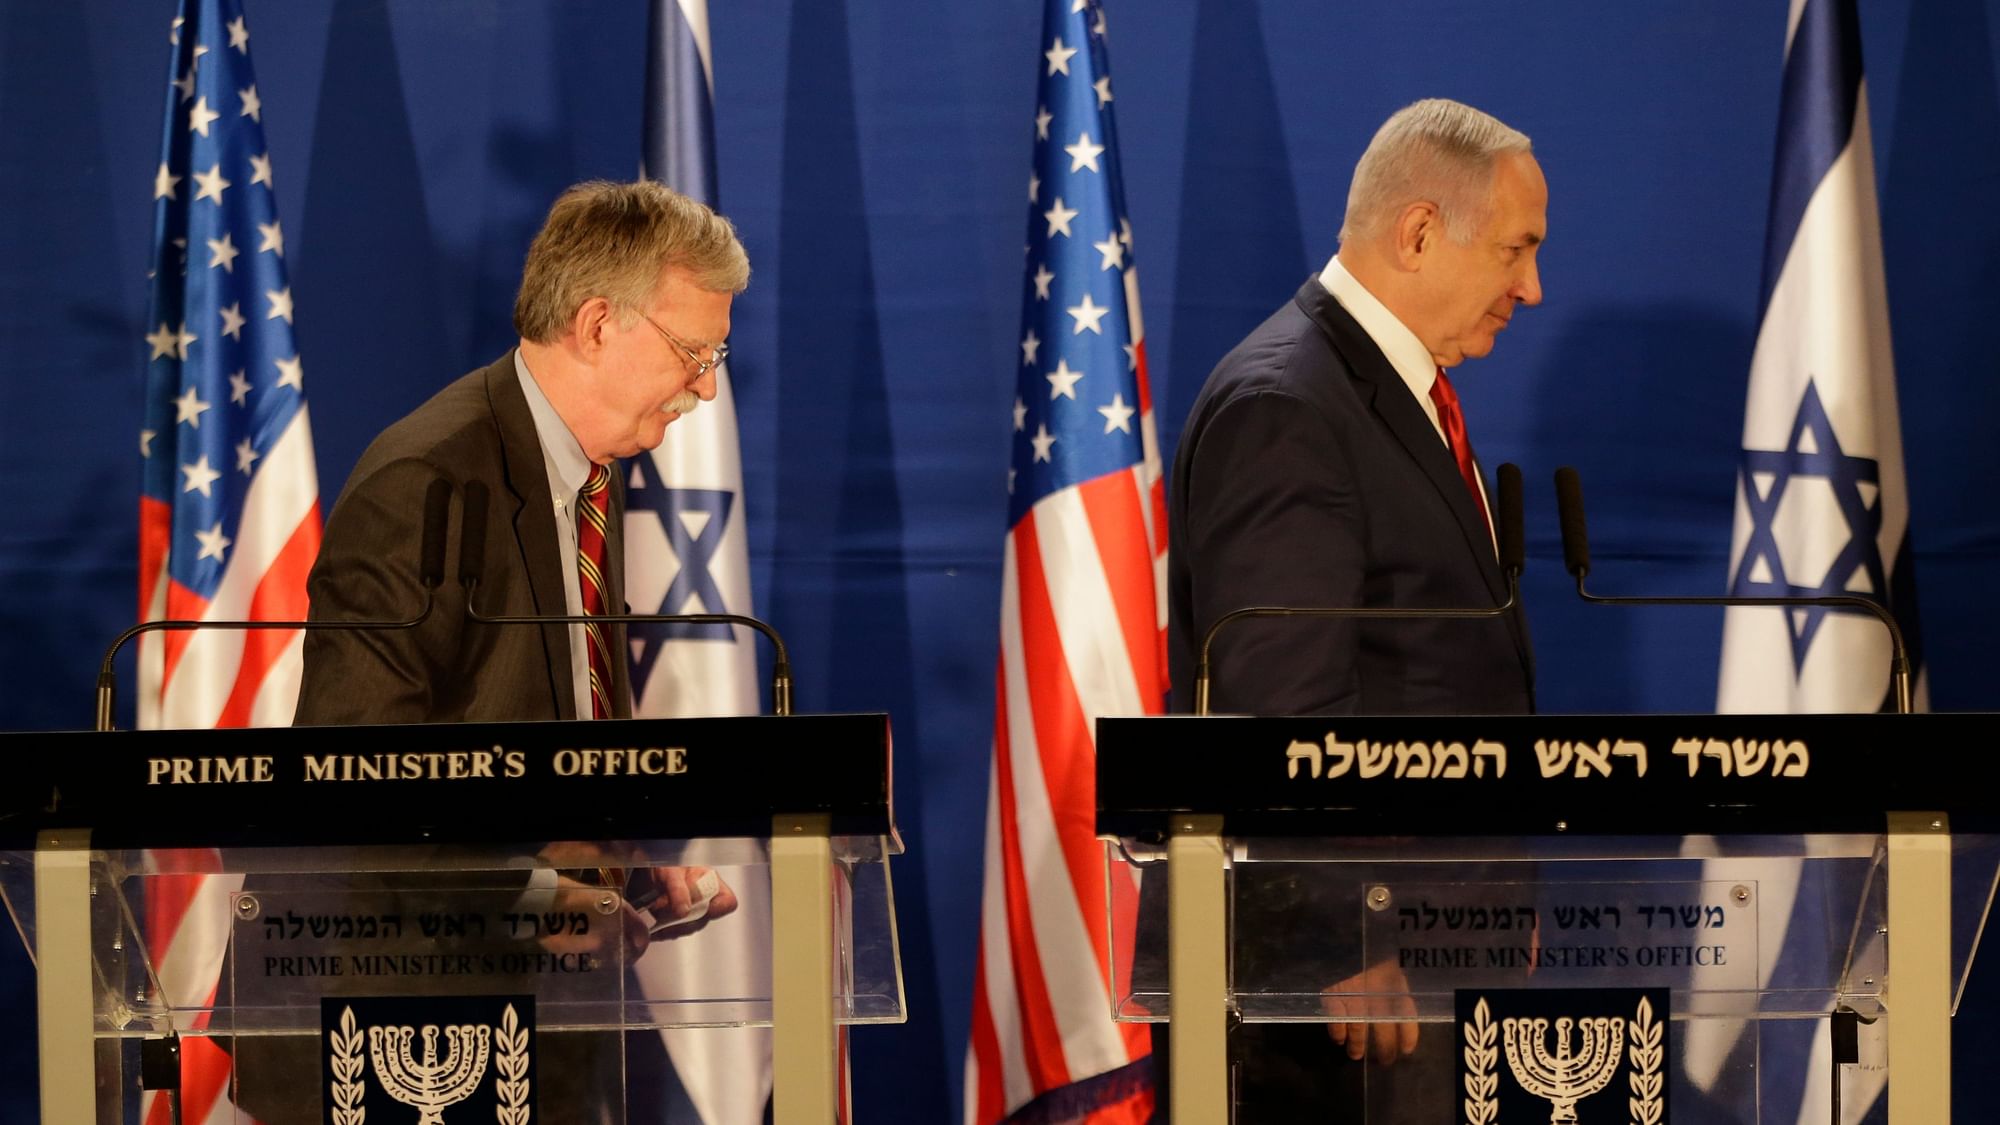 Israeli Prime Minister Benjamin Netanyahu (right) and US National Security Advisor John Bolton, leave the stage after their statement to the media follow their meeting, in Jerusalem on 7 January, 2019.&nbsp;